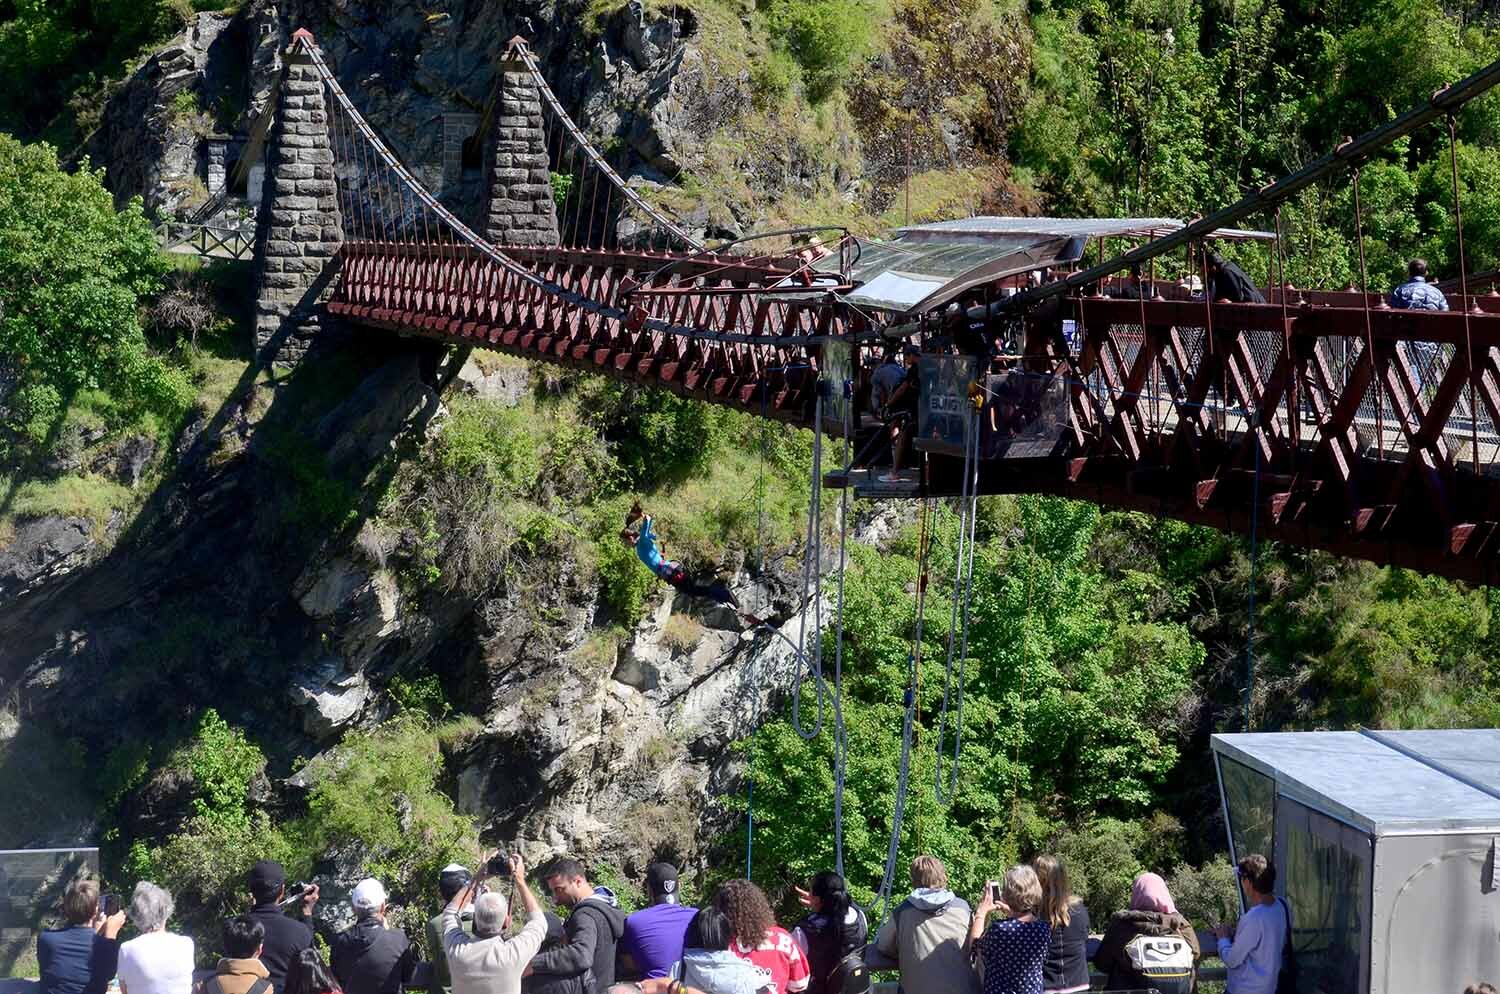 If you look really closely, you can see me jumping off that bridge! Yikes!